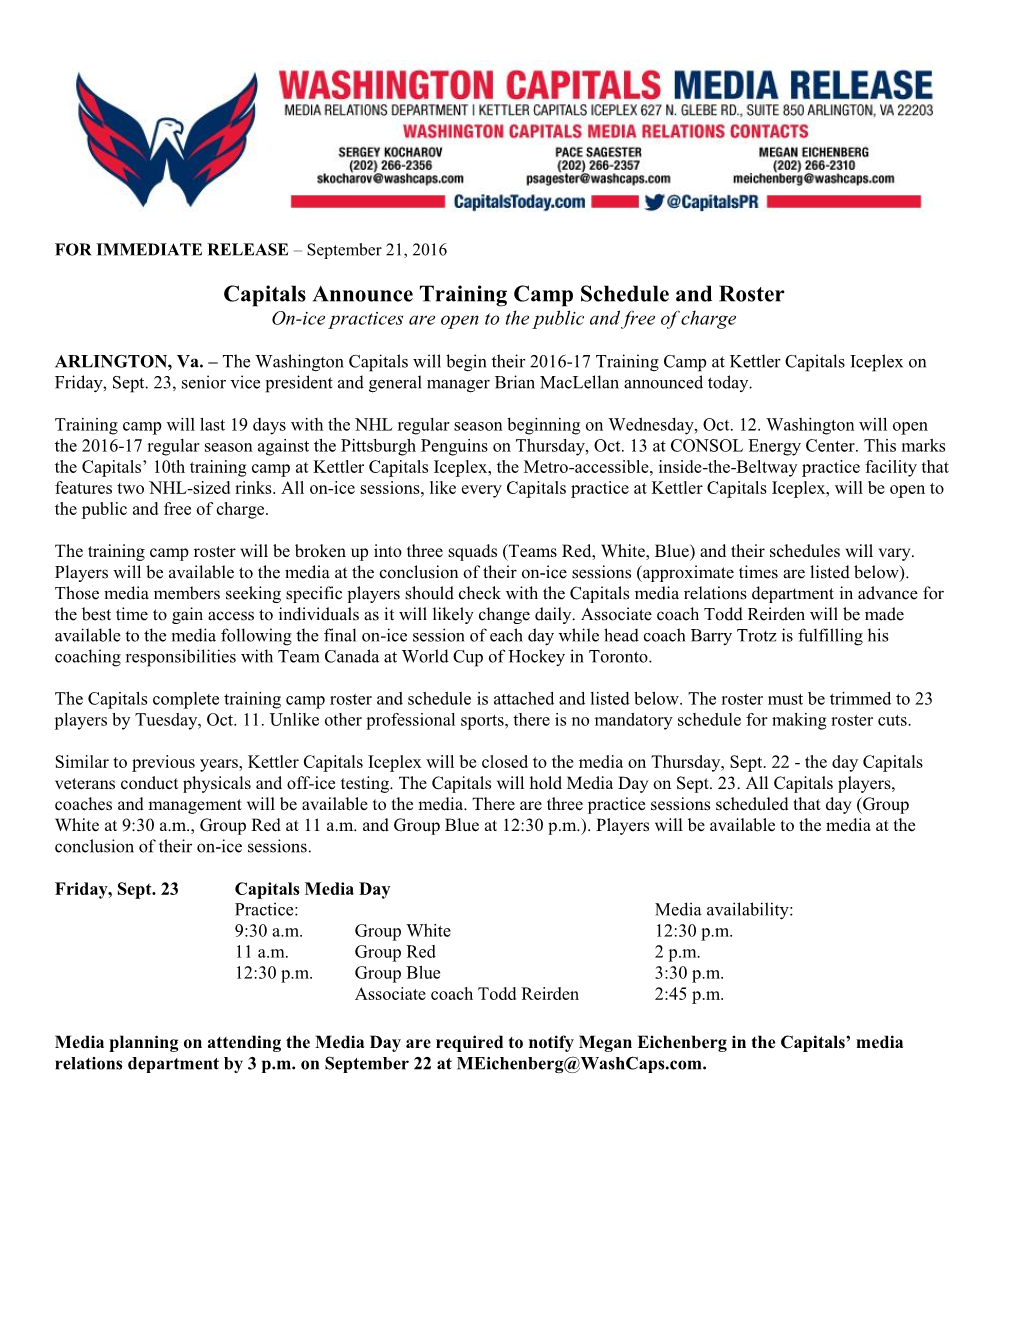 Capitals Announce Training Camp Schedule and Roster On-Ice Practices Are Open to the Public and Free of Charge